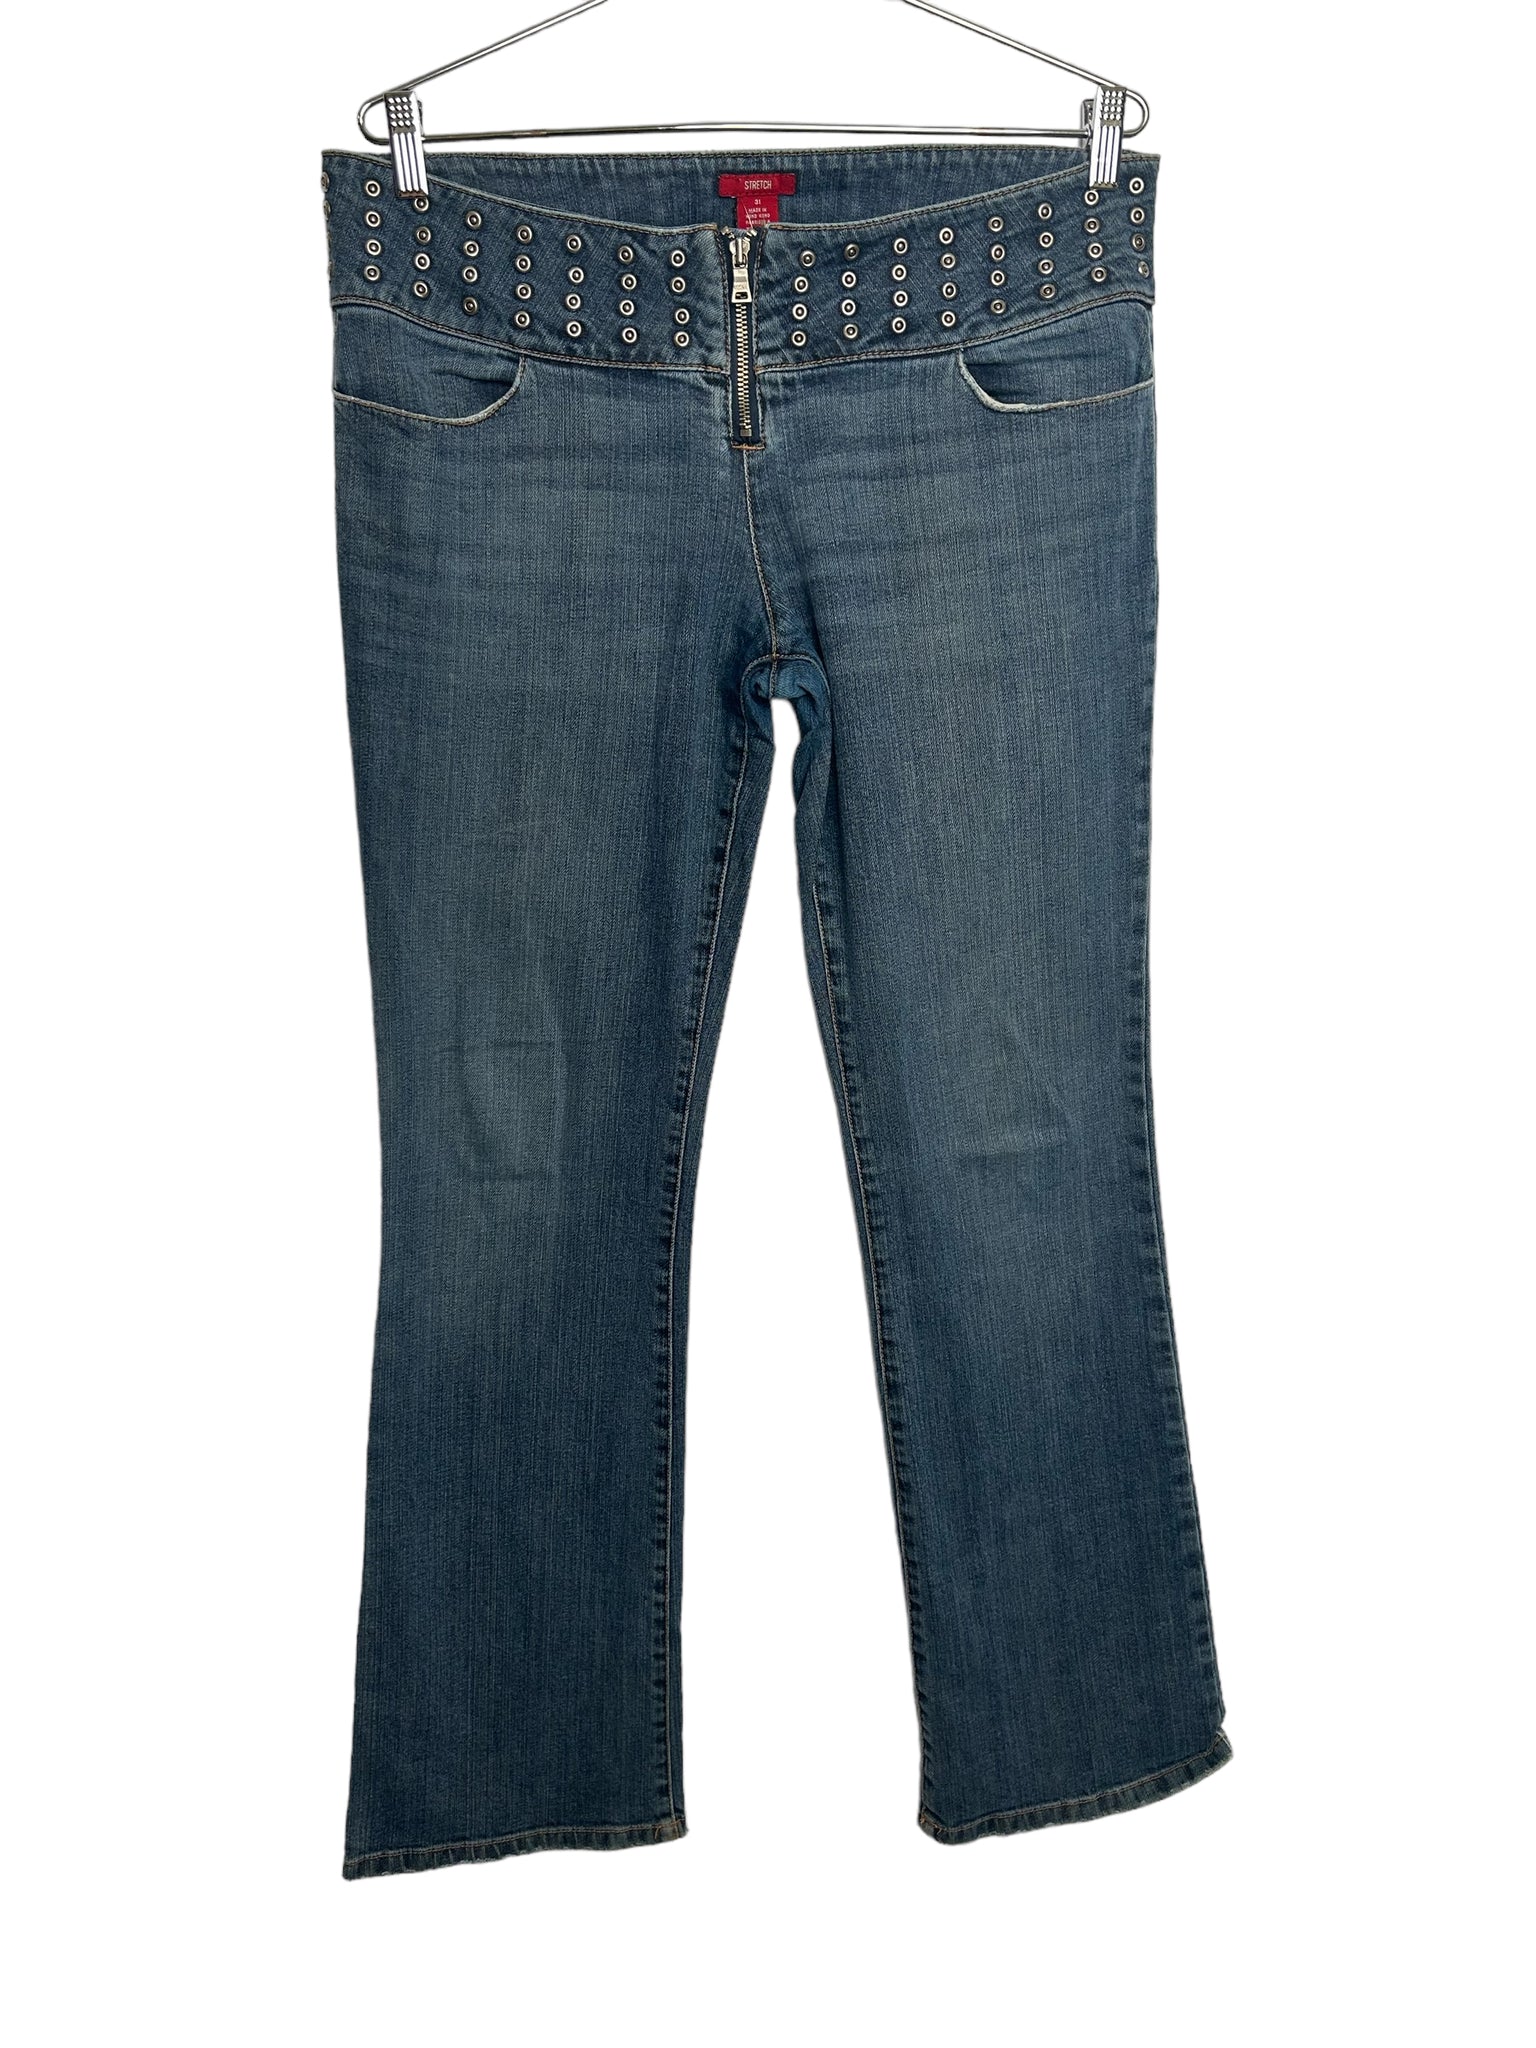 Guess Studded Waist Flare Jeans